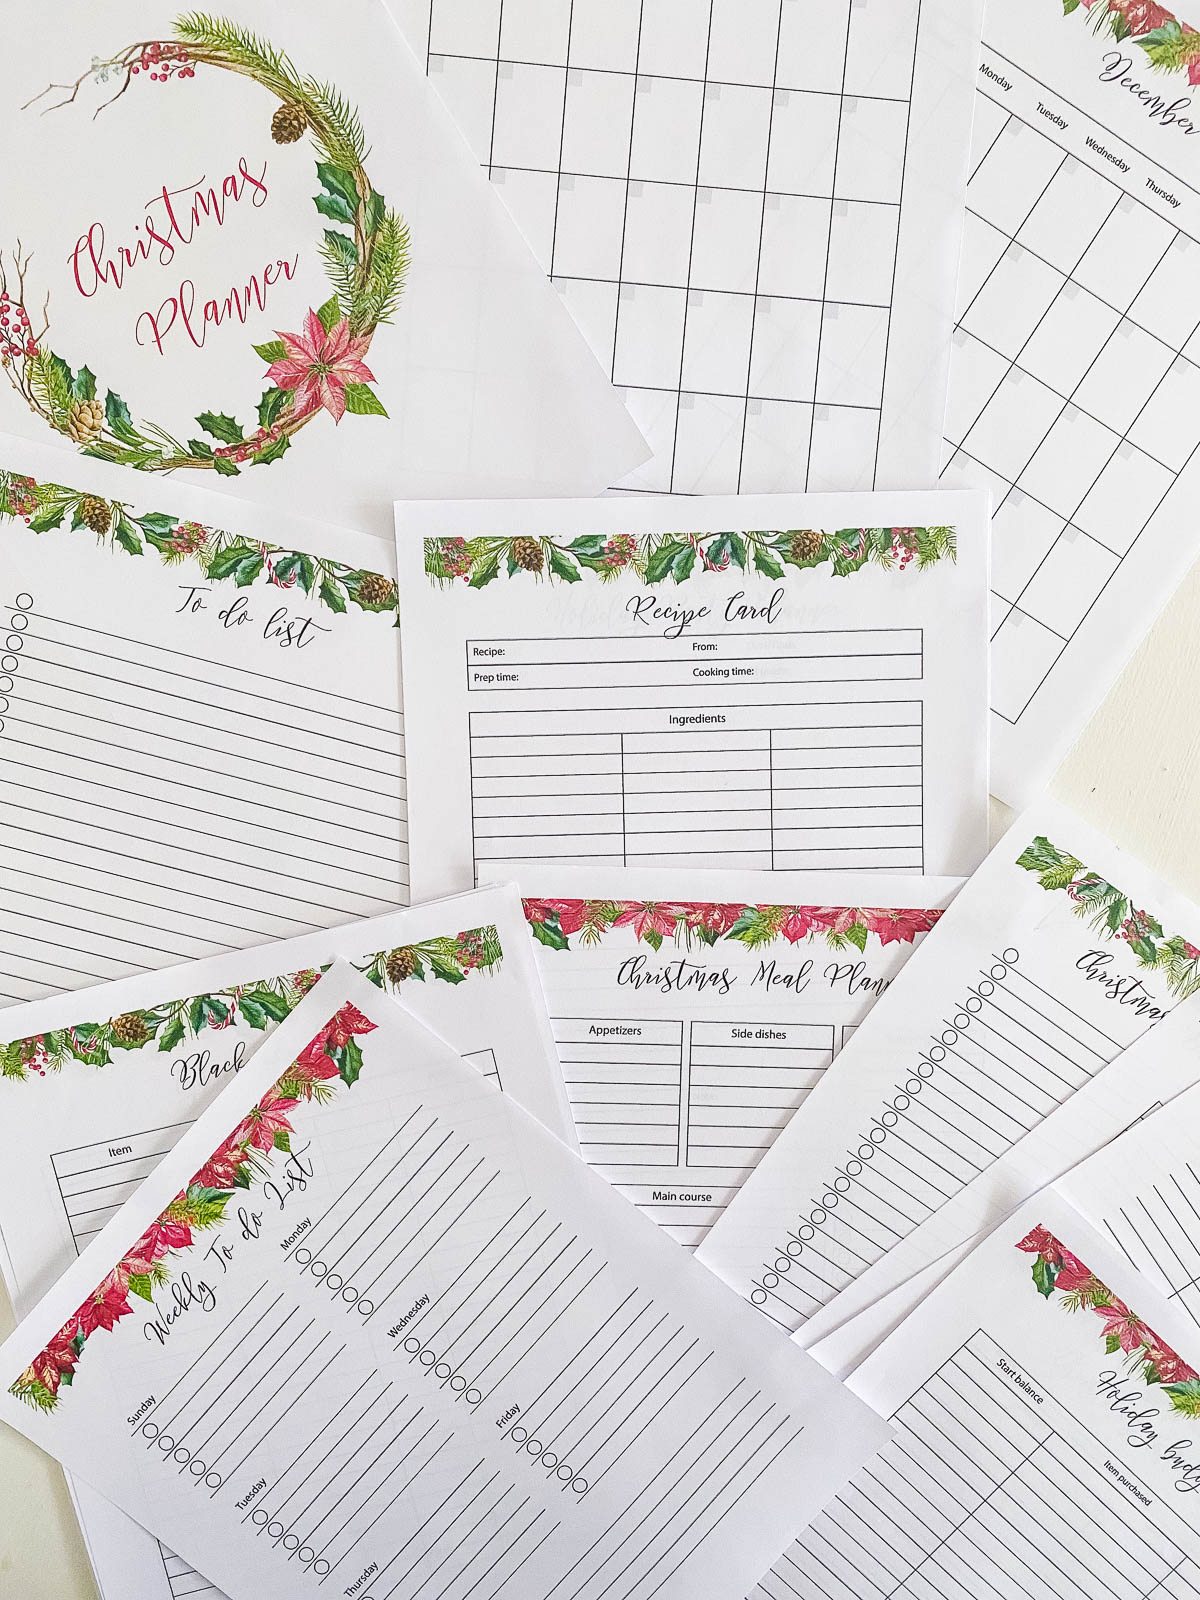 Grab A Free 24 Page Handy Holiday Planner & More! The Style Showcase 215